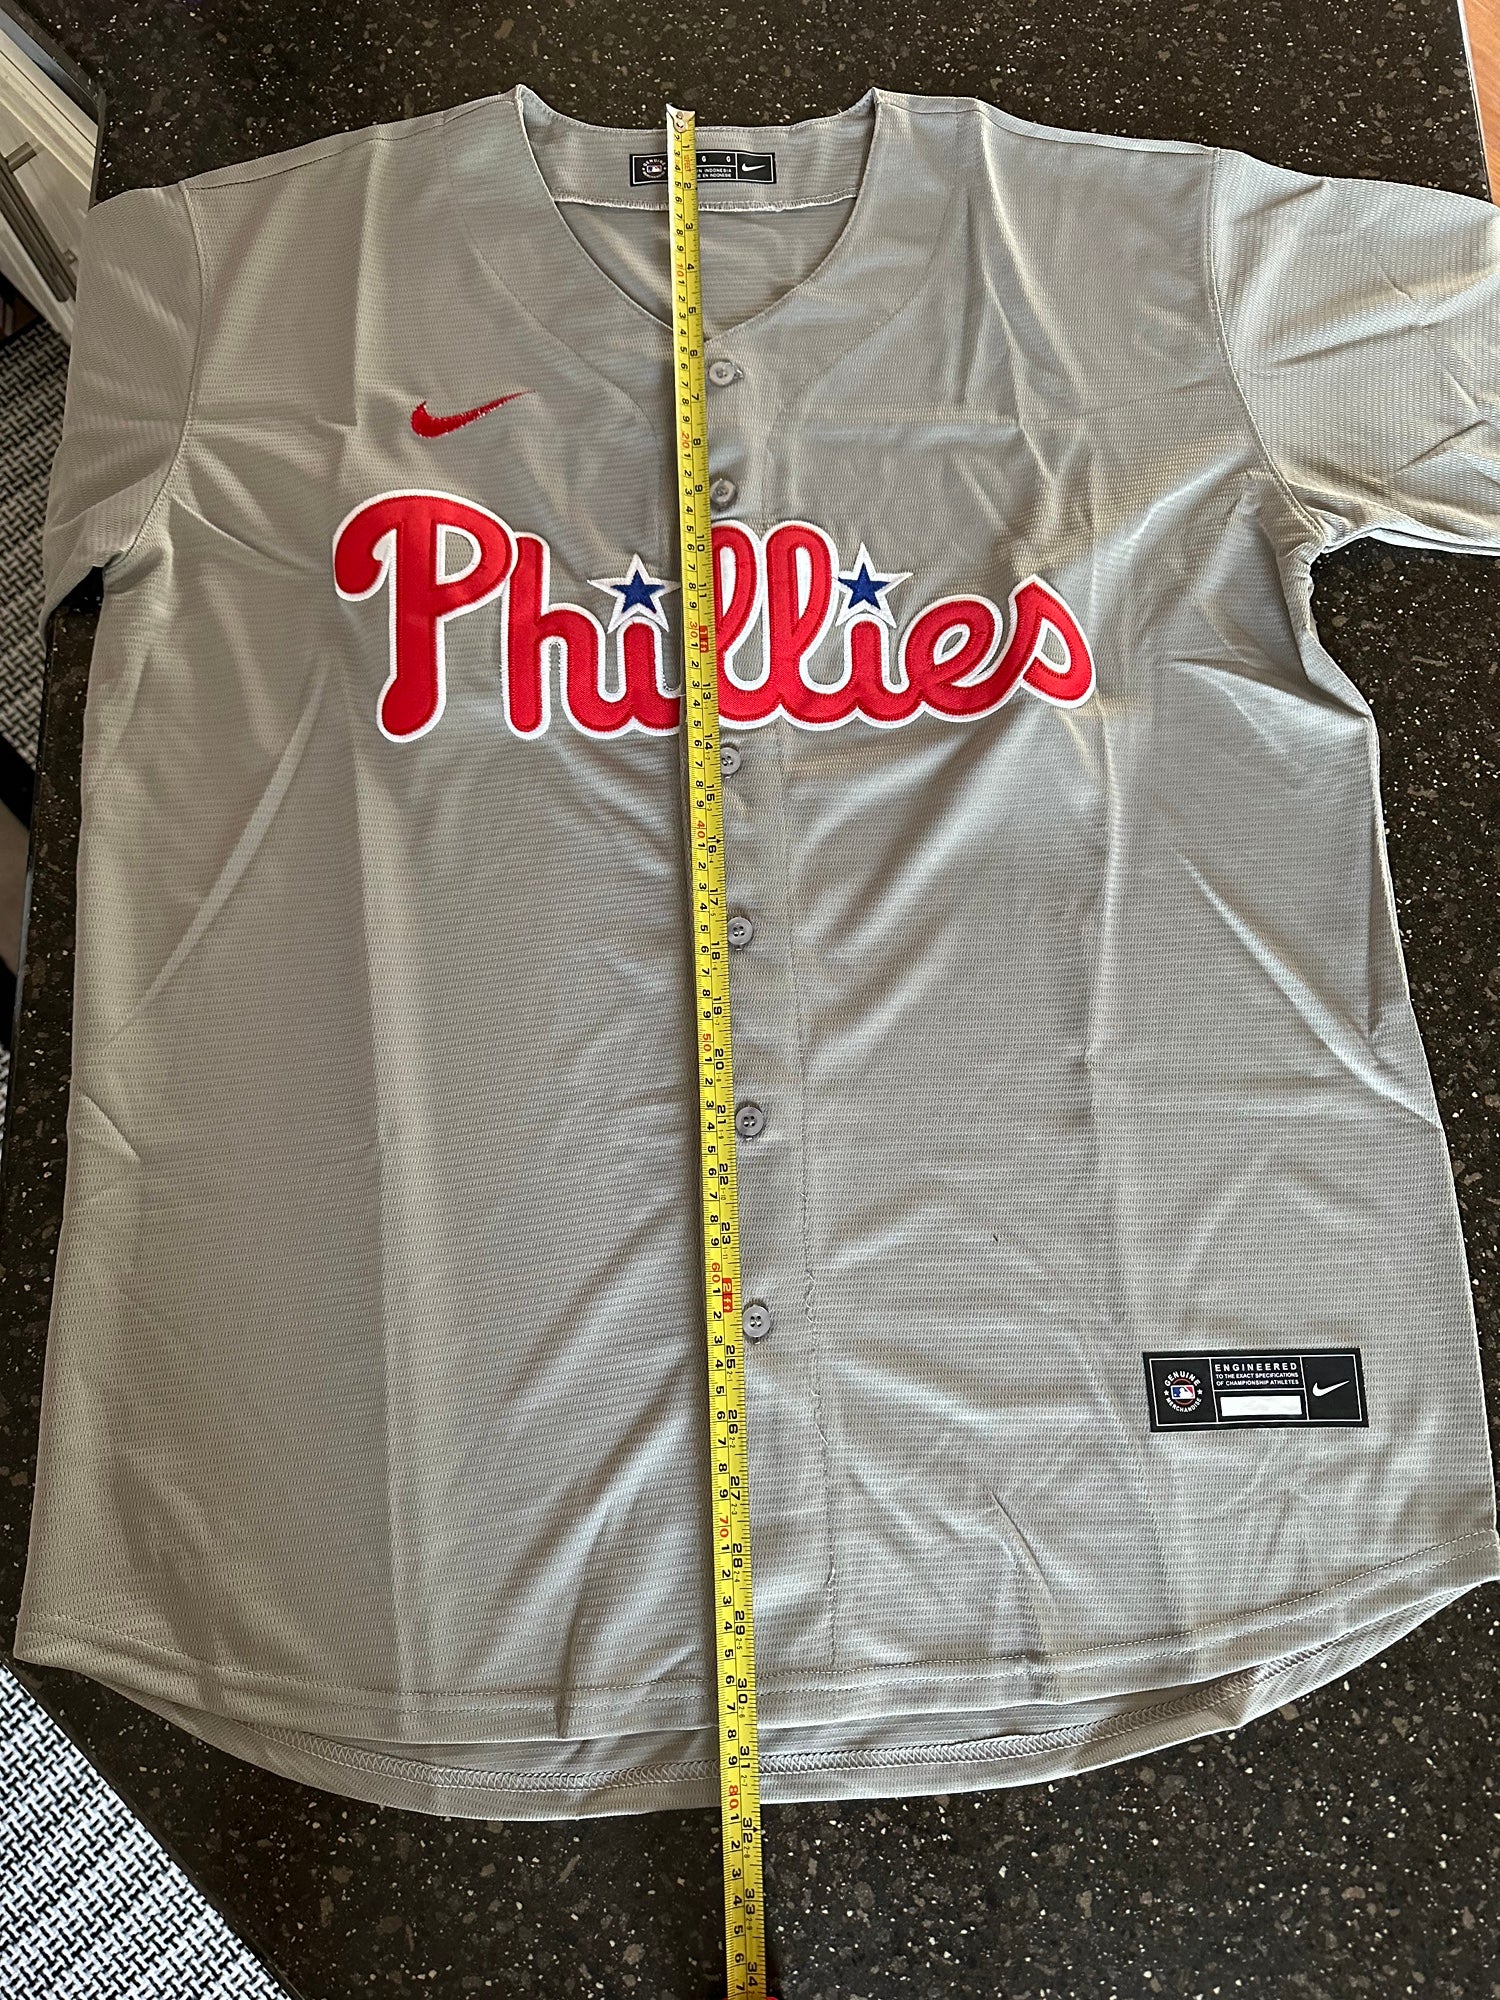 2017-18 Philadelphia Phillies Blank Game Issued Grey Jersey Memorial Day 50  203